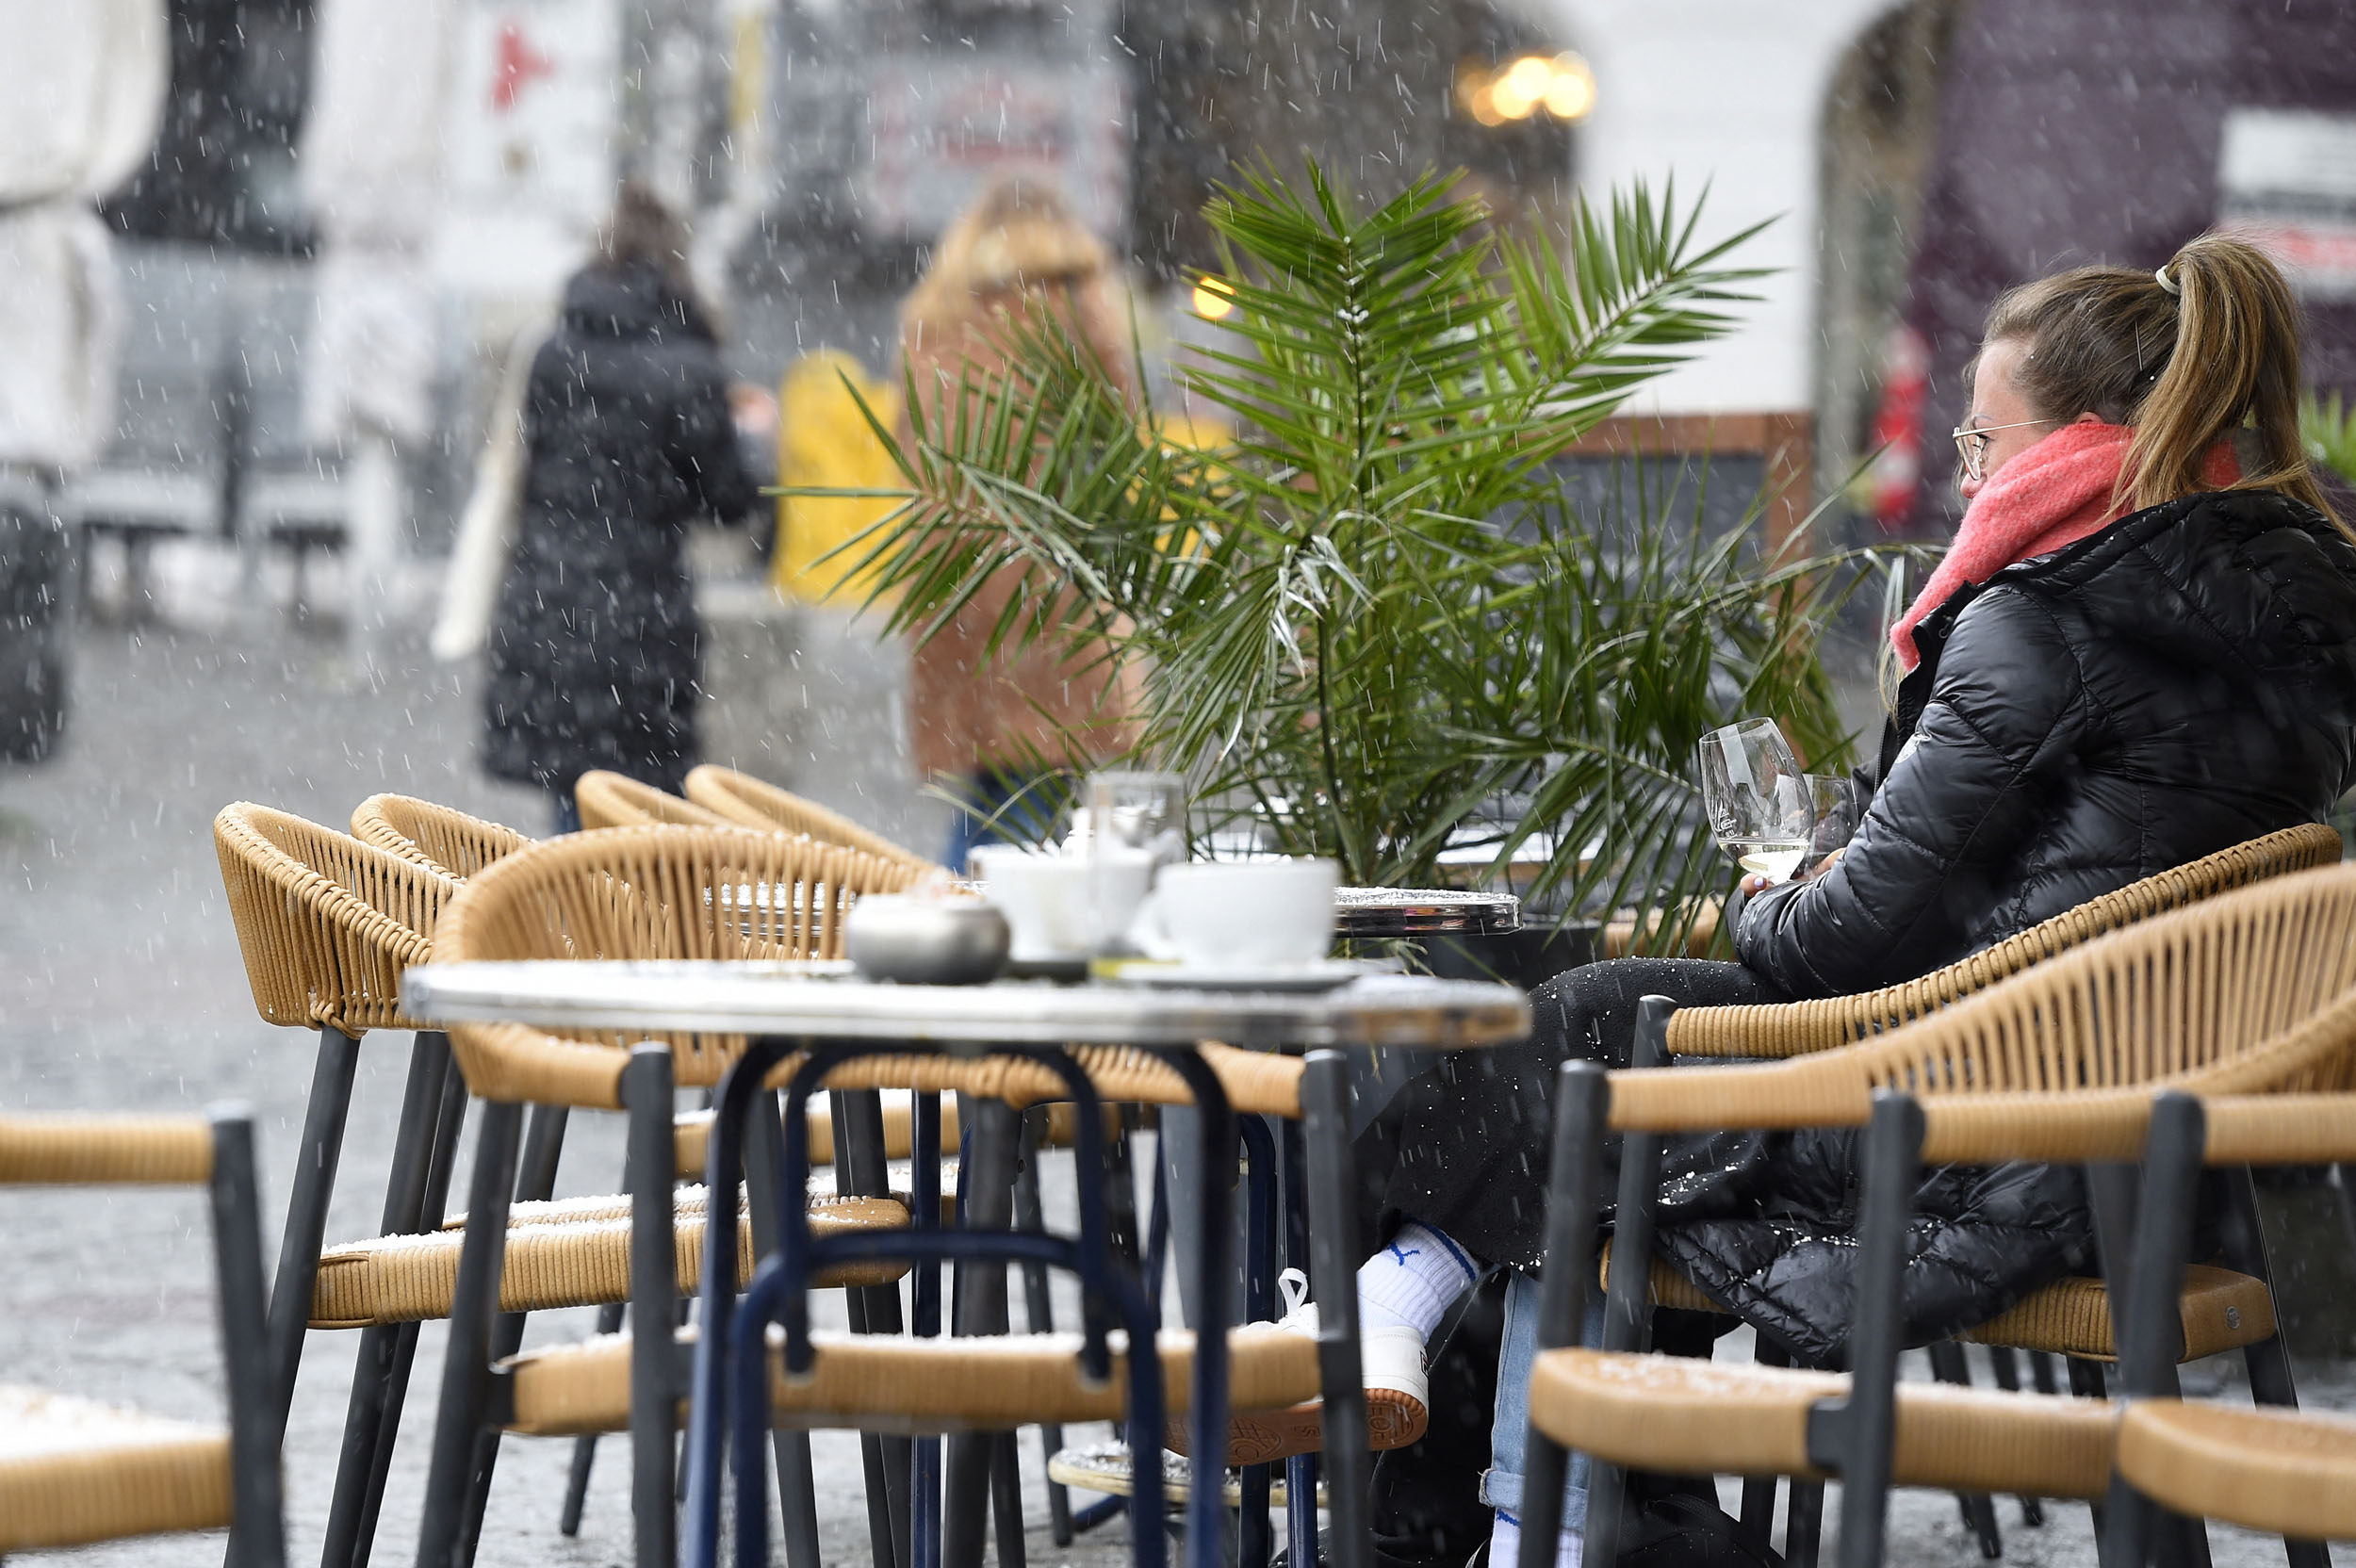 A woman takes a drink outside at a cafe during a sleet shower in Saarbruecken, western Germany, on April 6, 2021, as the border state of Saarland on Tuesday partially reopened during the ongoing coronavirus (Covid-19) pandemic. - Germans in the tiny border state of Saarland returned to cafes, cinemas and cultural venues on April 6, even as the rest of the country faces tighter coronavirus restrictions amid rising case numbers. (Photo by JEAN-CHRISTOPHE VERHAEGEN / AFP)